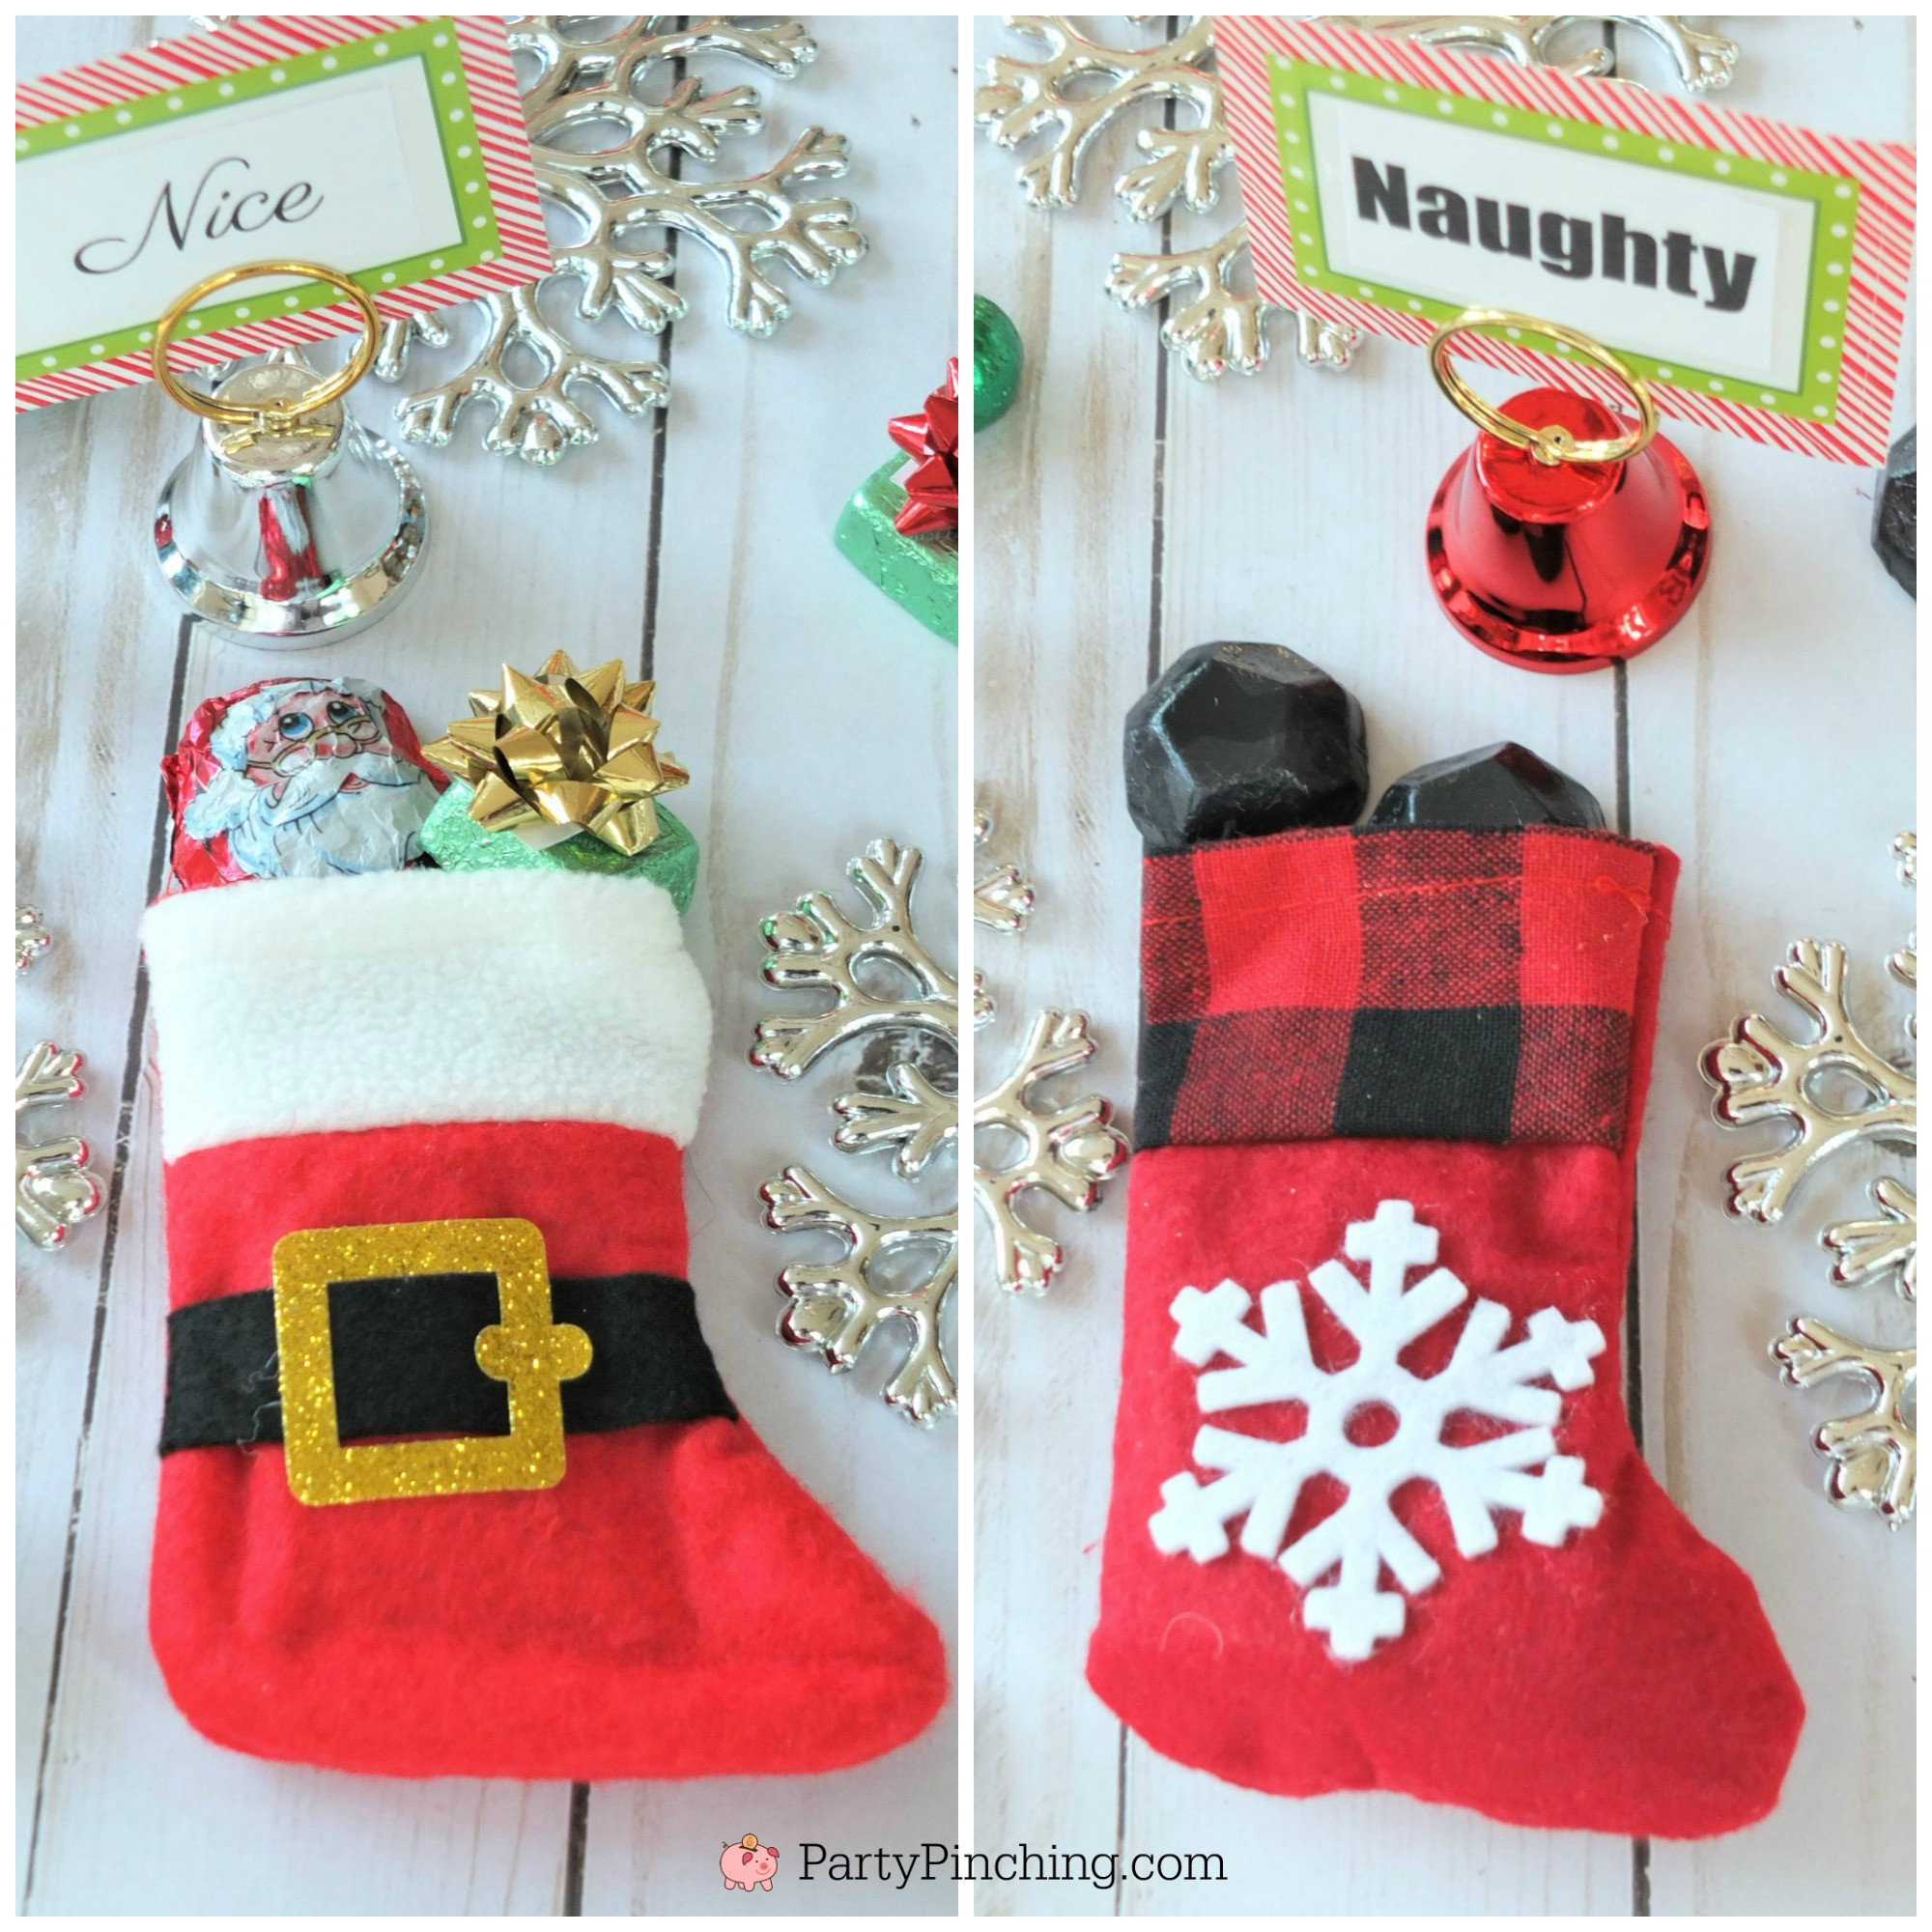 Naughty Or Nice Christmas Party Ideas
 Naughty or Nice Christmas treats candy coal in stocking